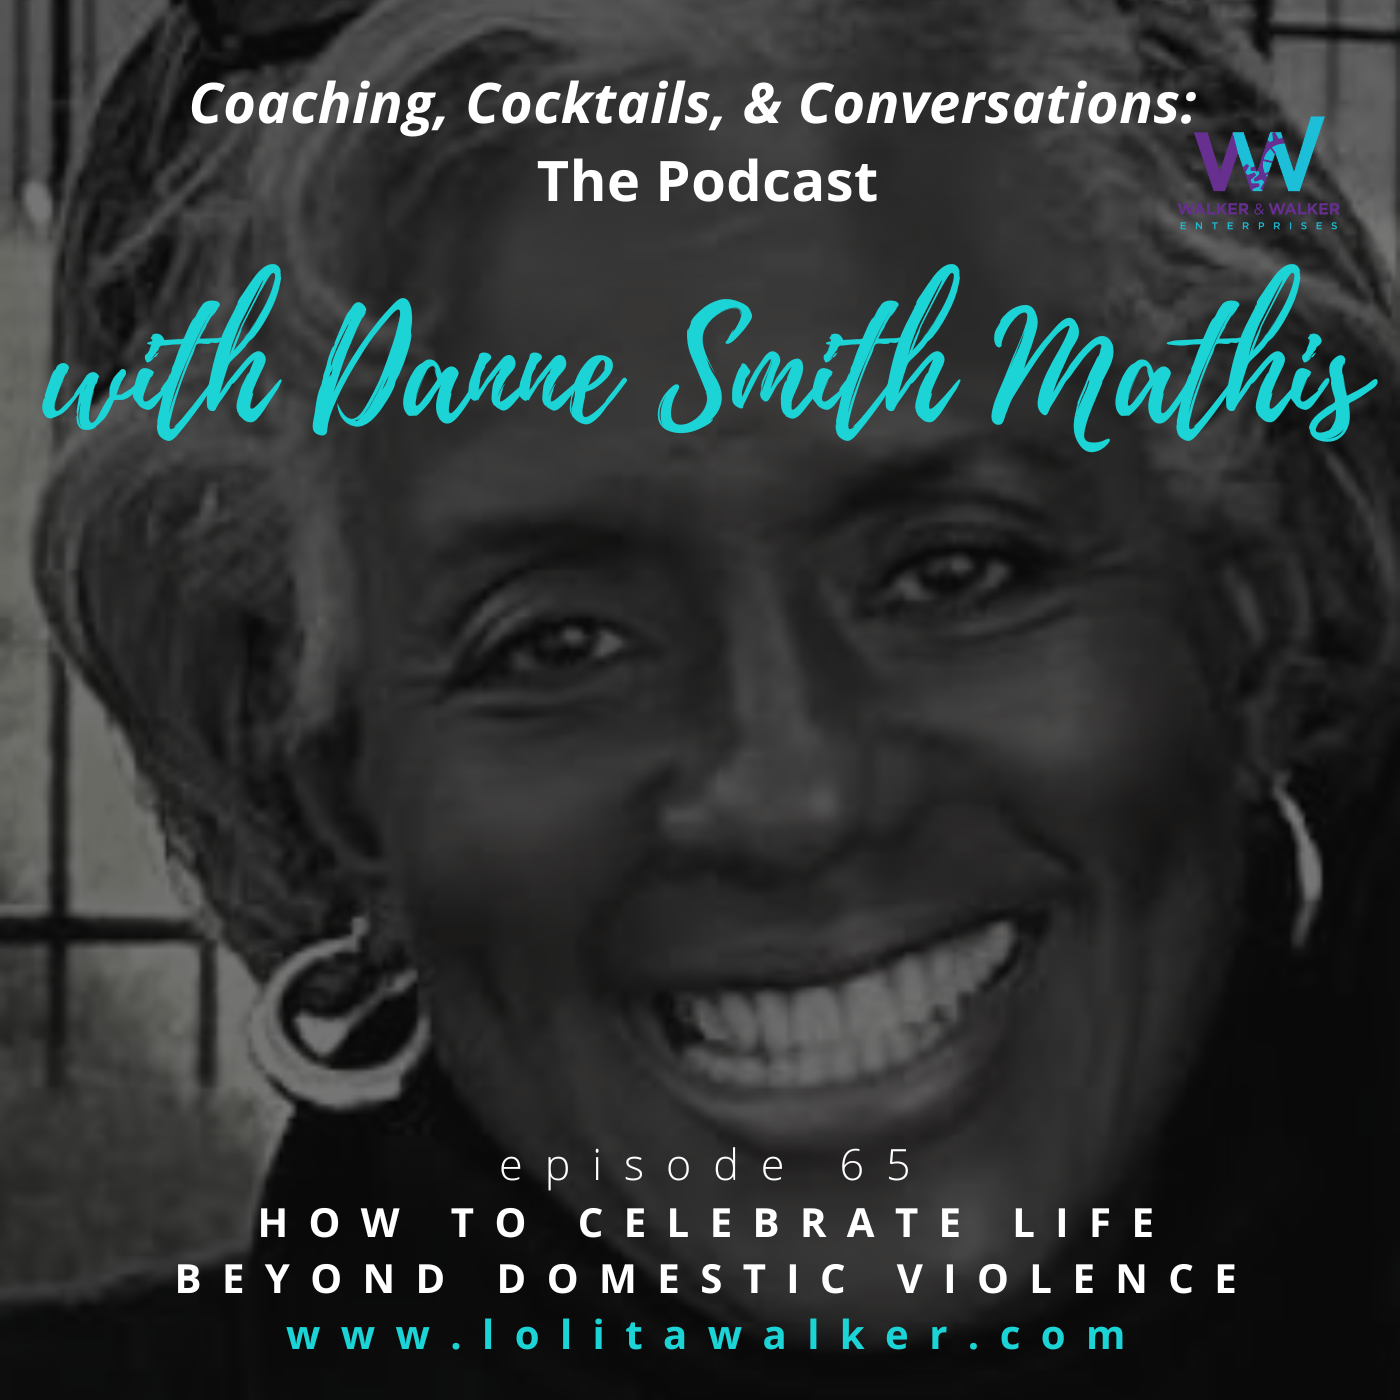 S365 - How to Celebrate Life Beyond Domestic Violence (with Danne Smith Mathis) Image